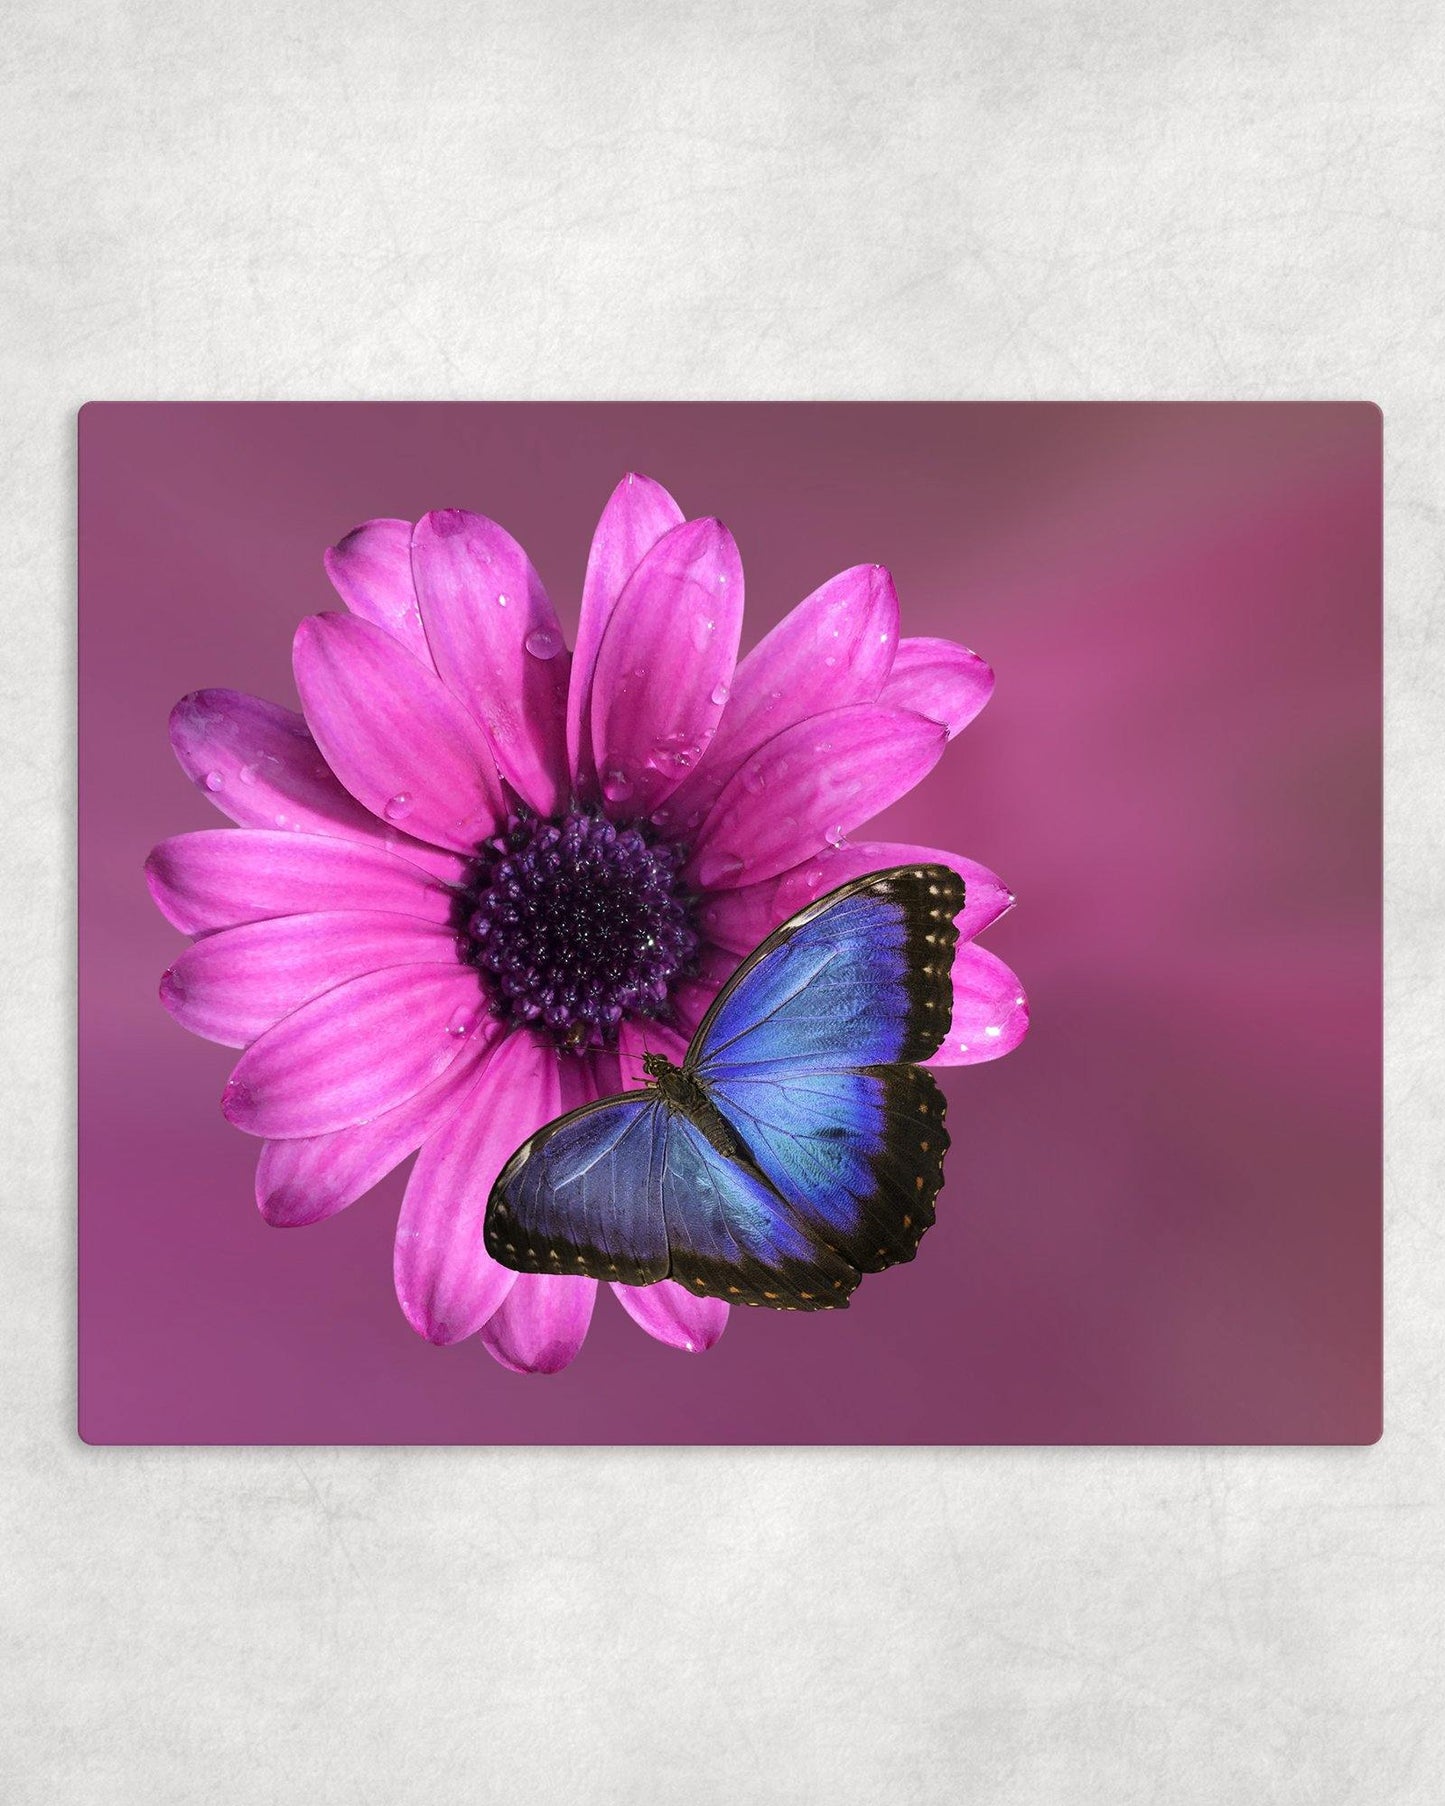 Blue Butterfly on Pink Flower Metal Photo Panel - 8x10 - Schoppix Gifts